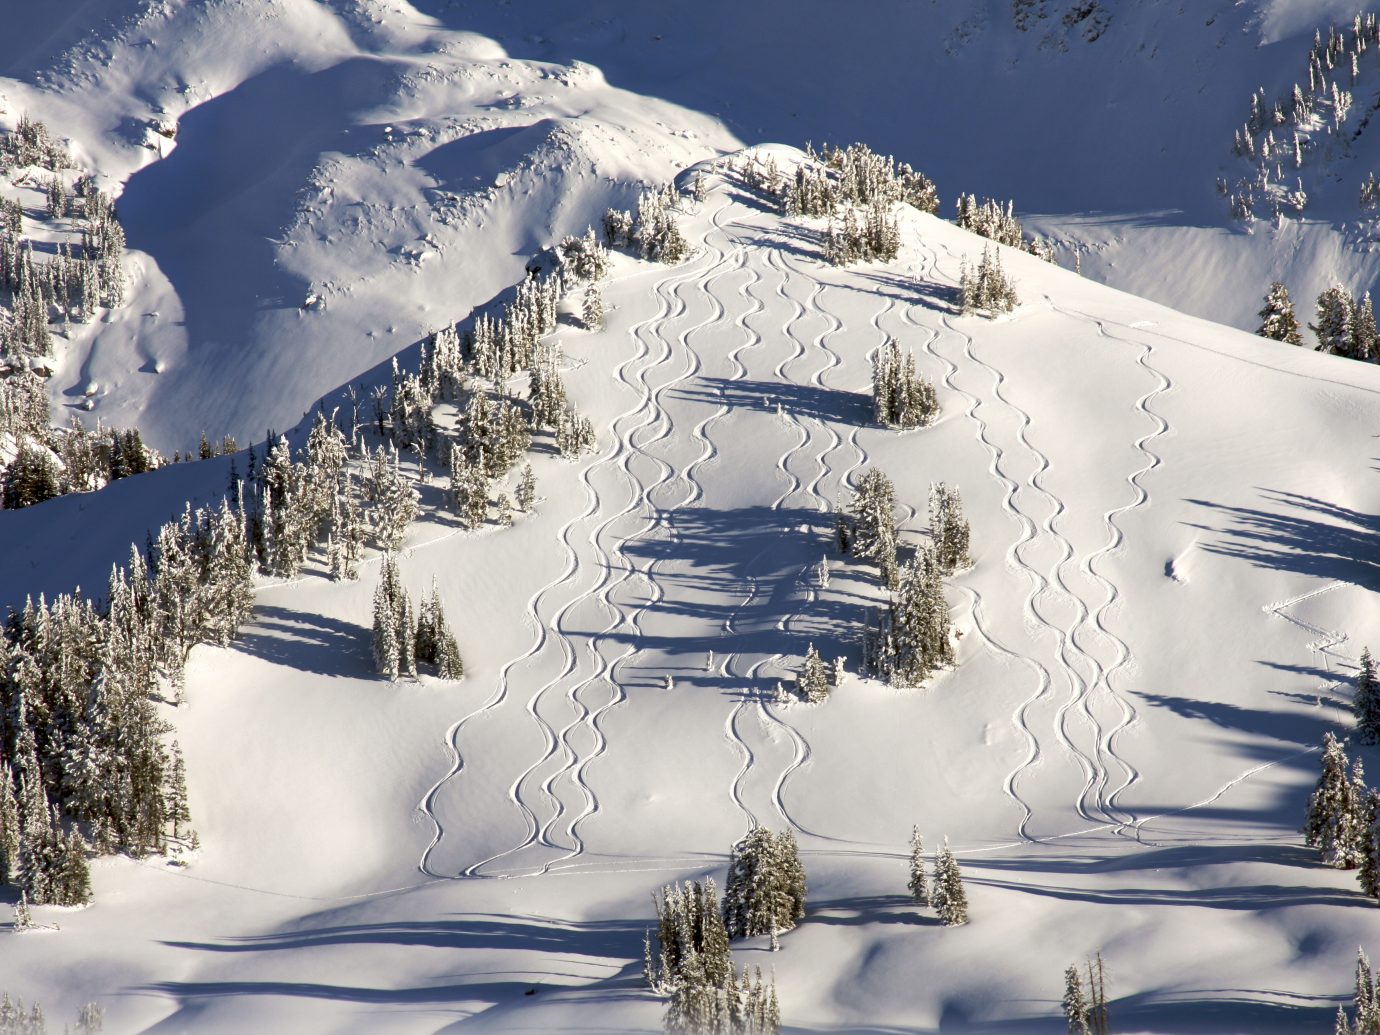 Backcountry skiers leave their mark in Grand Teton National Park.